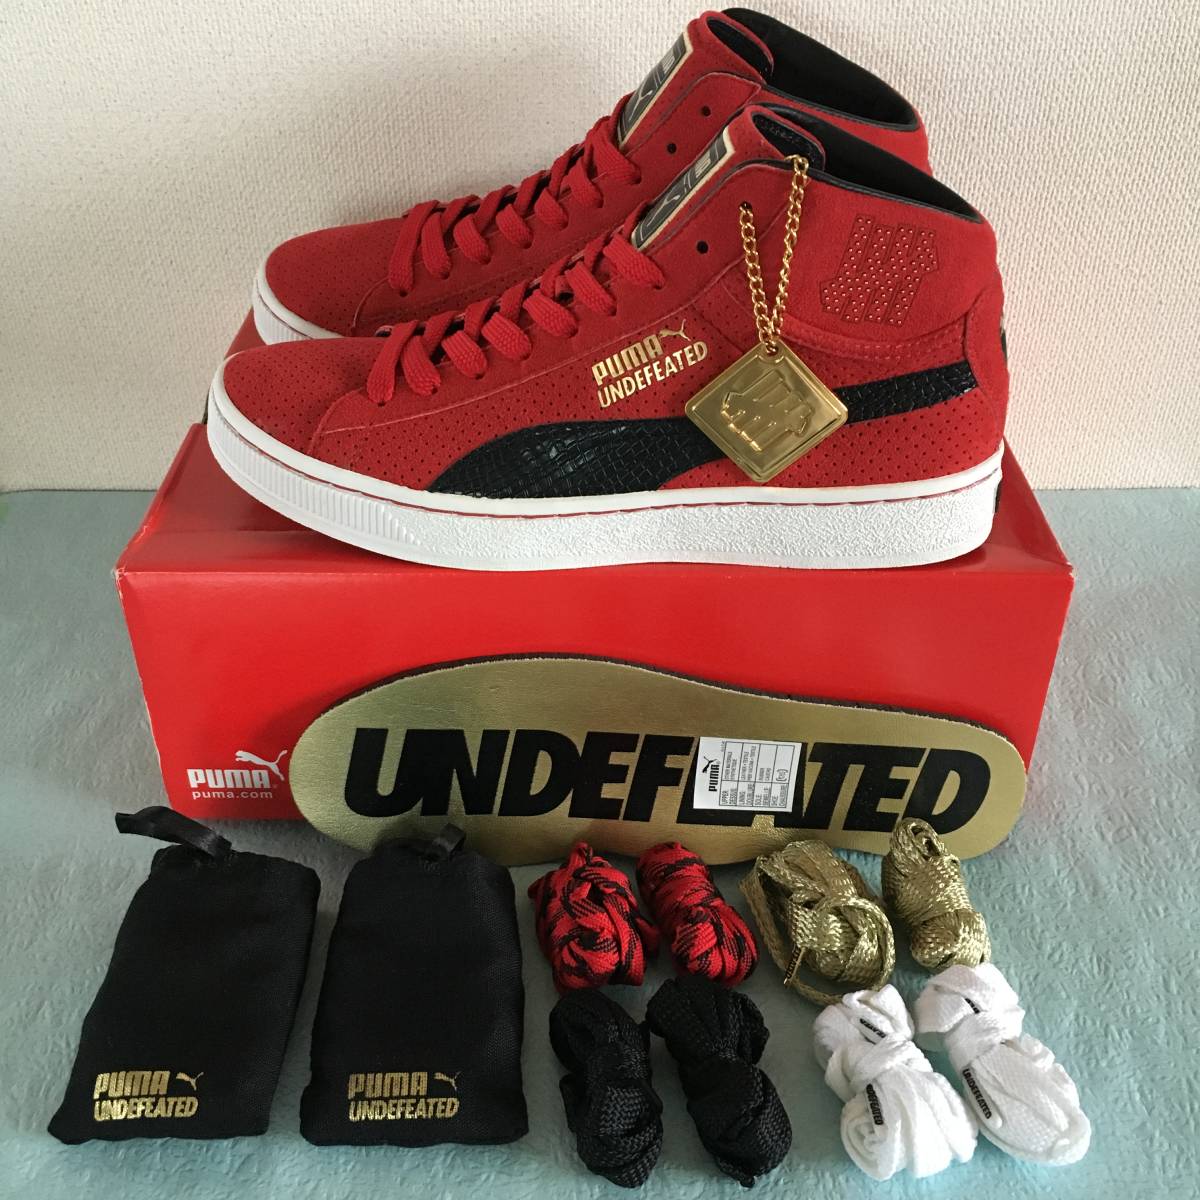 【The LIST/限定モデル】 UNDEFEATED × PUMA SUEDE MID 24K (PURE GOLD) "RED" US9 27.0cm 金属製コラボタグ付き未使用品 _画像10